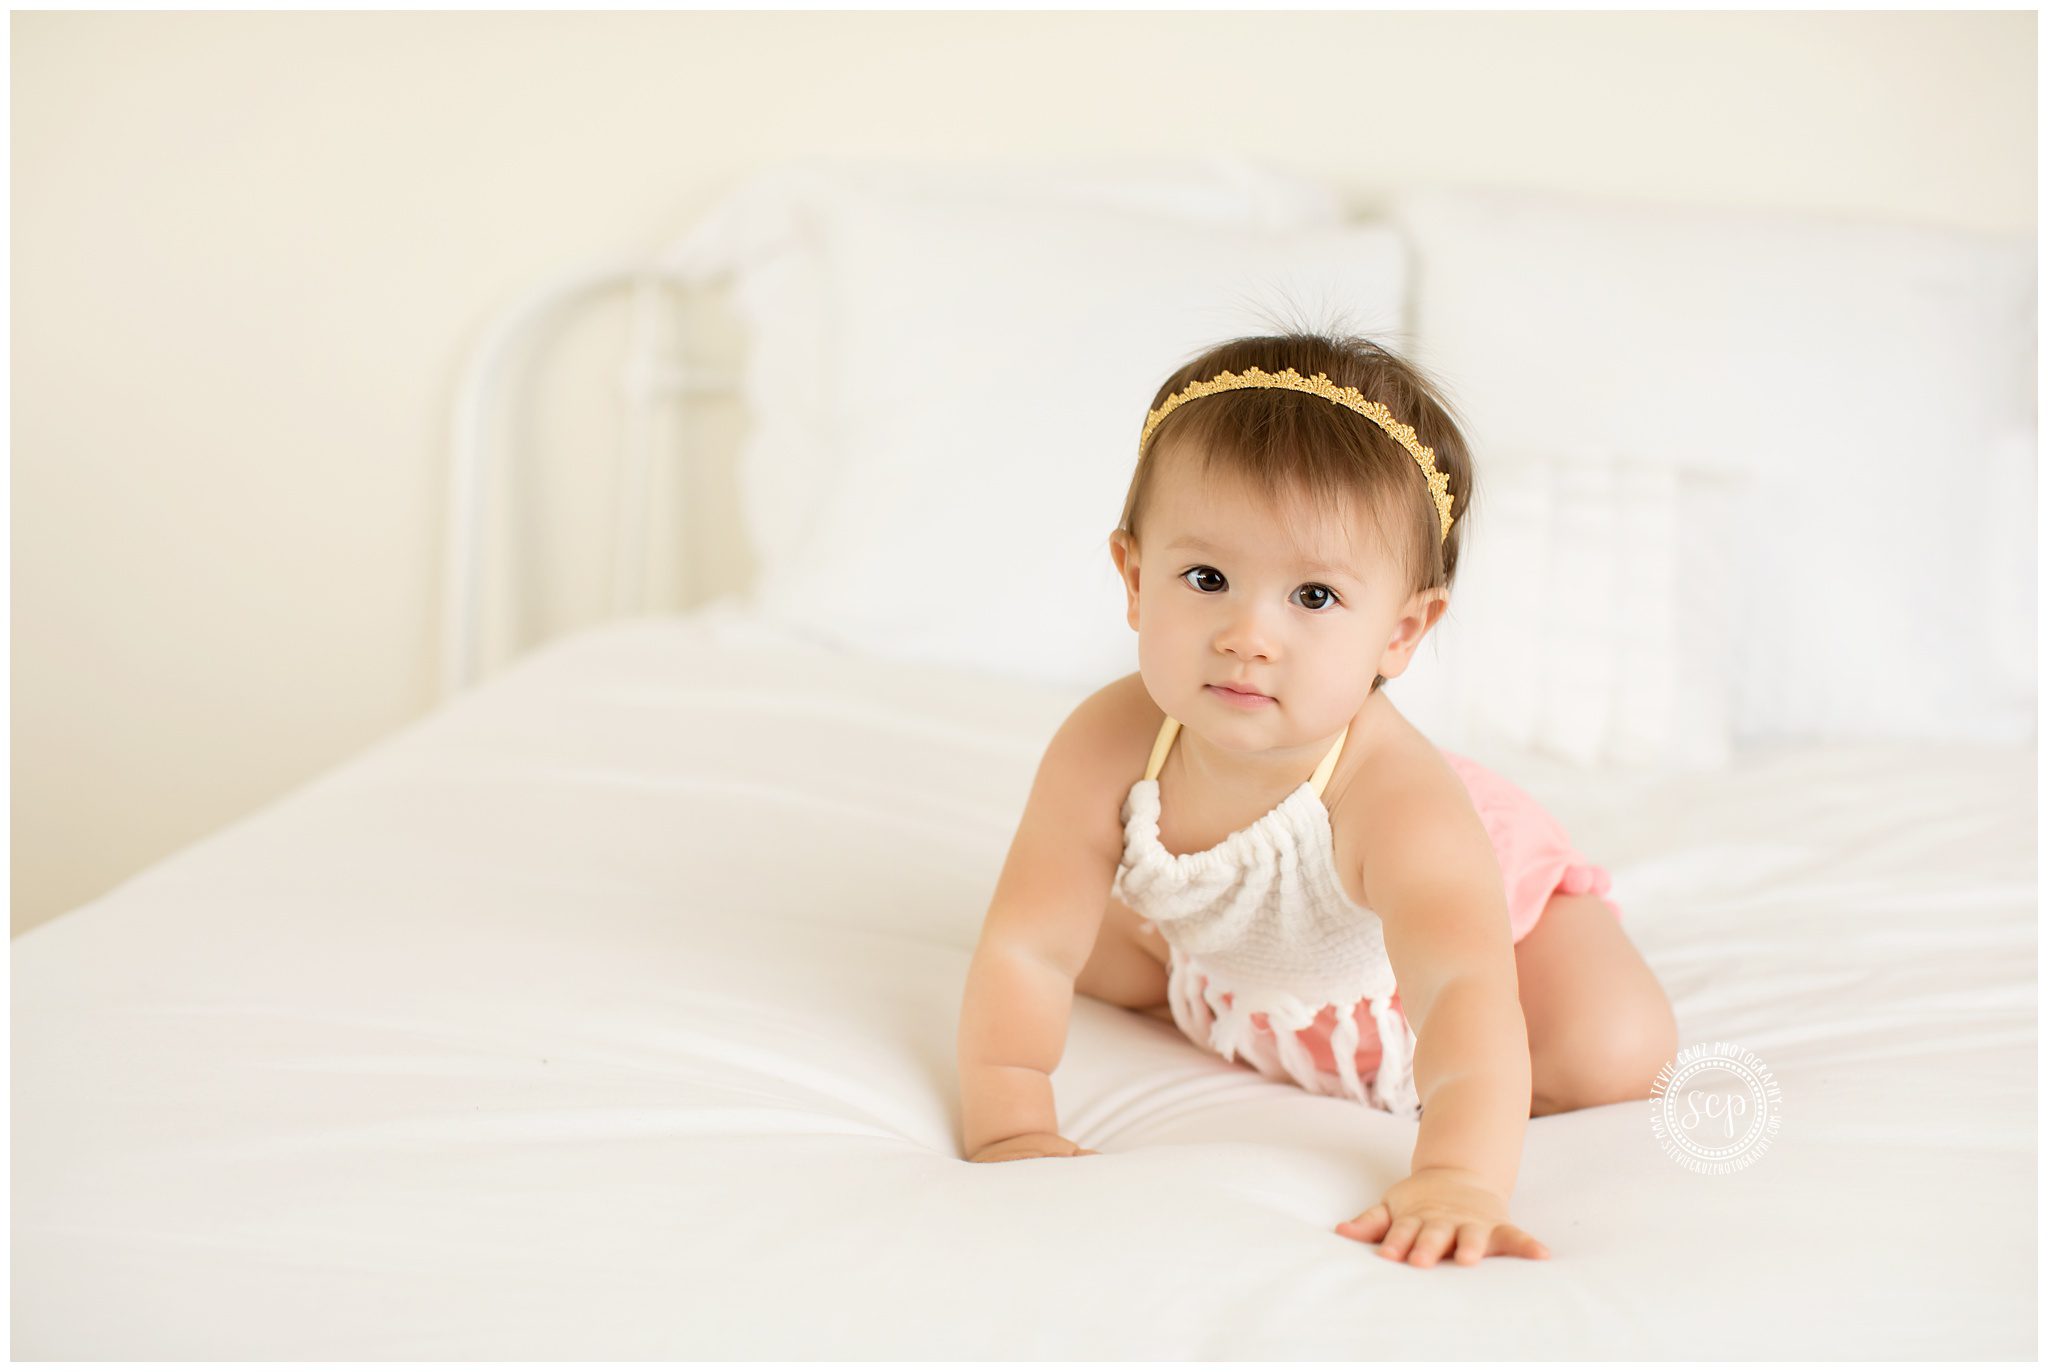 Orange county kids photographer offering in studio children pictures for first birthday 